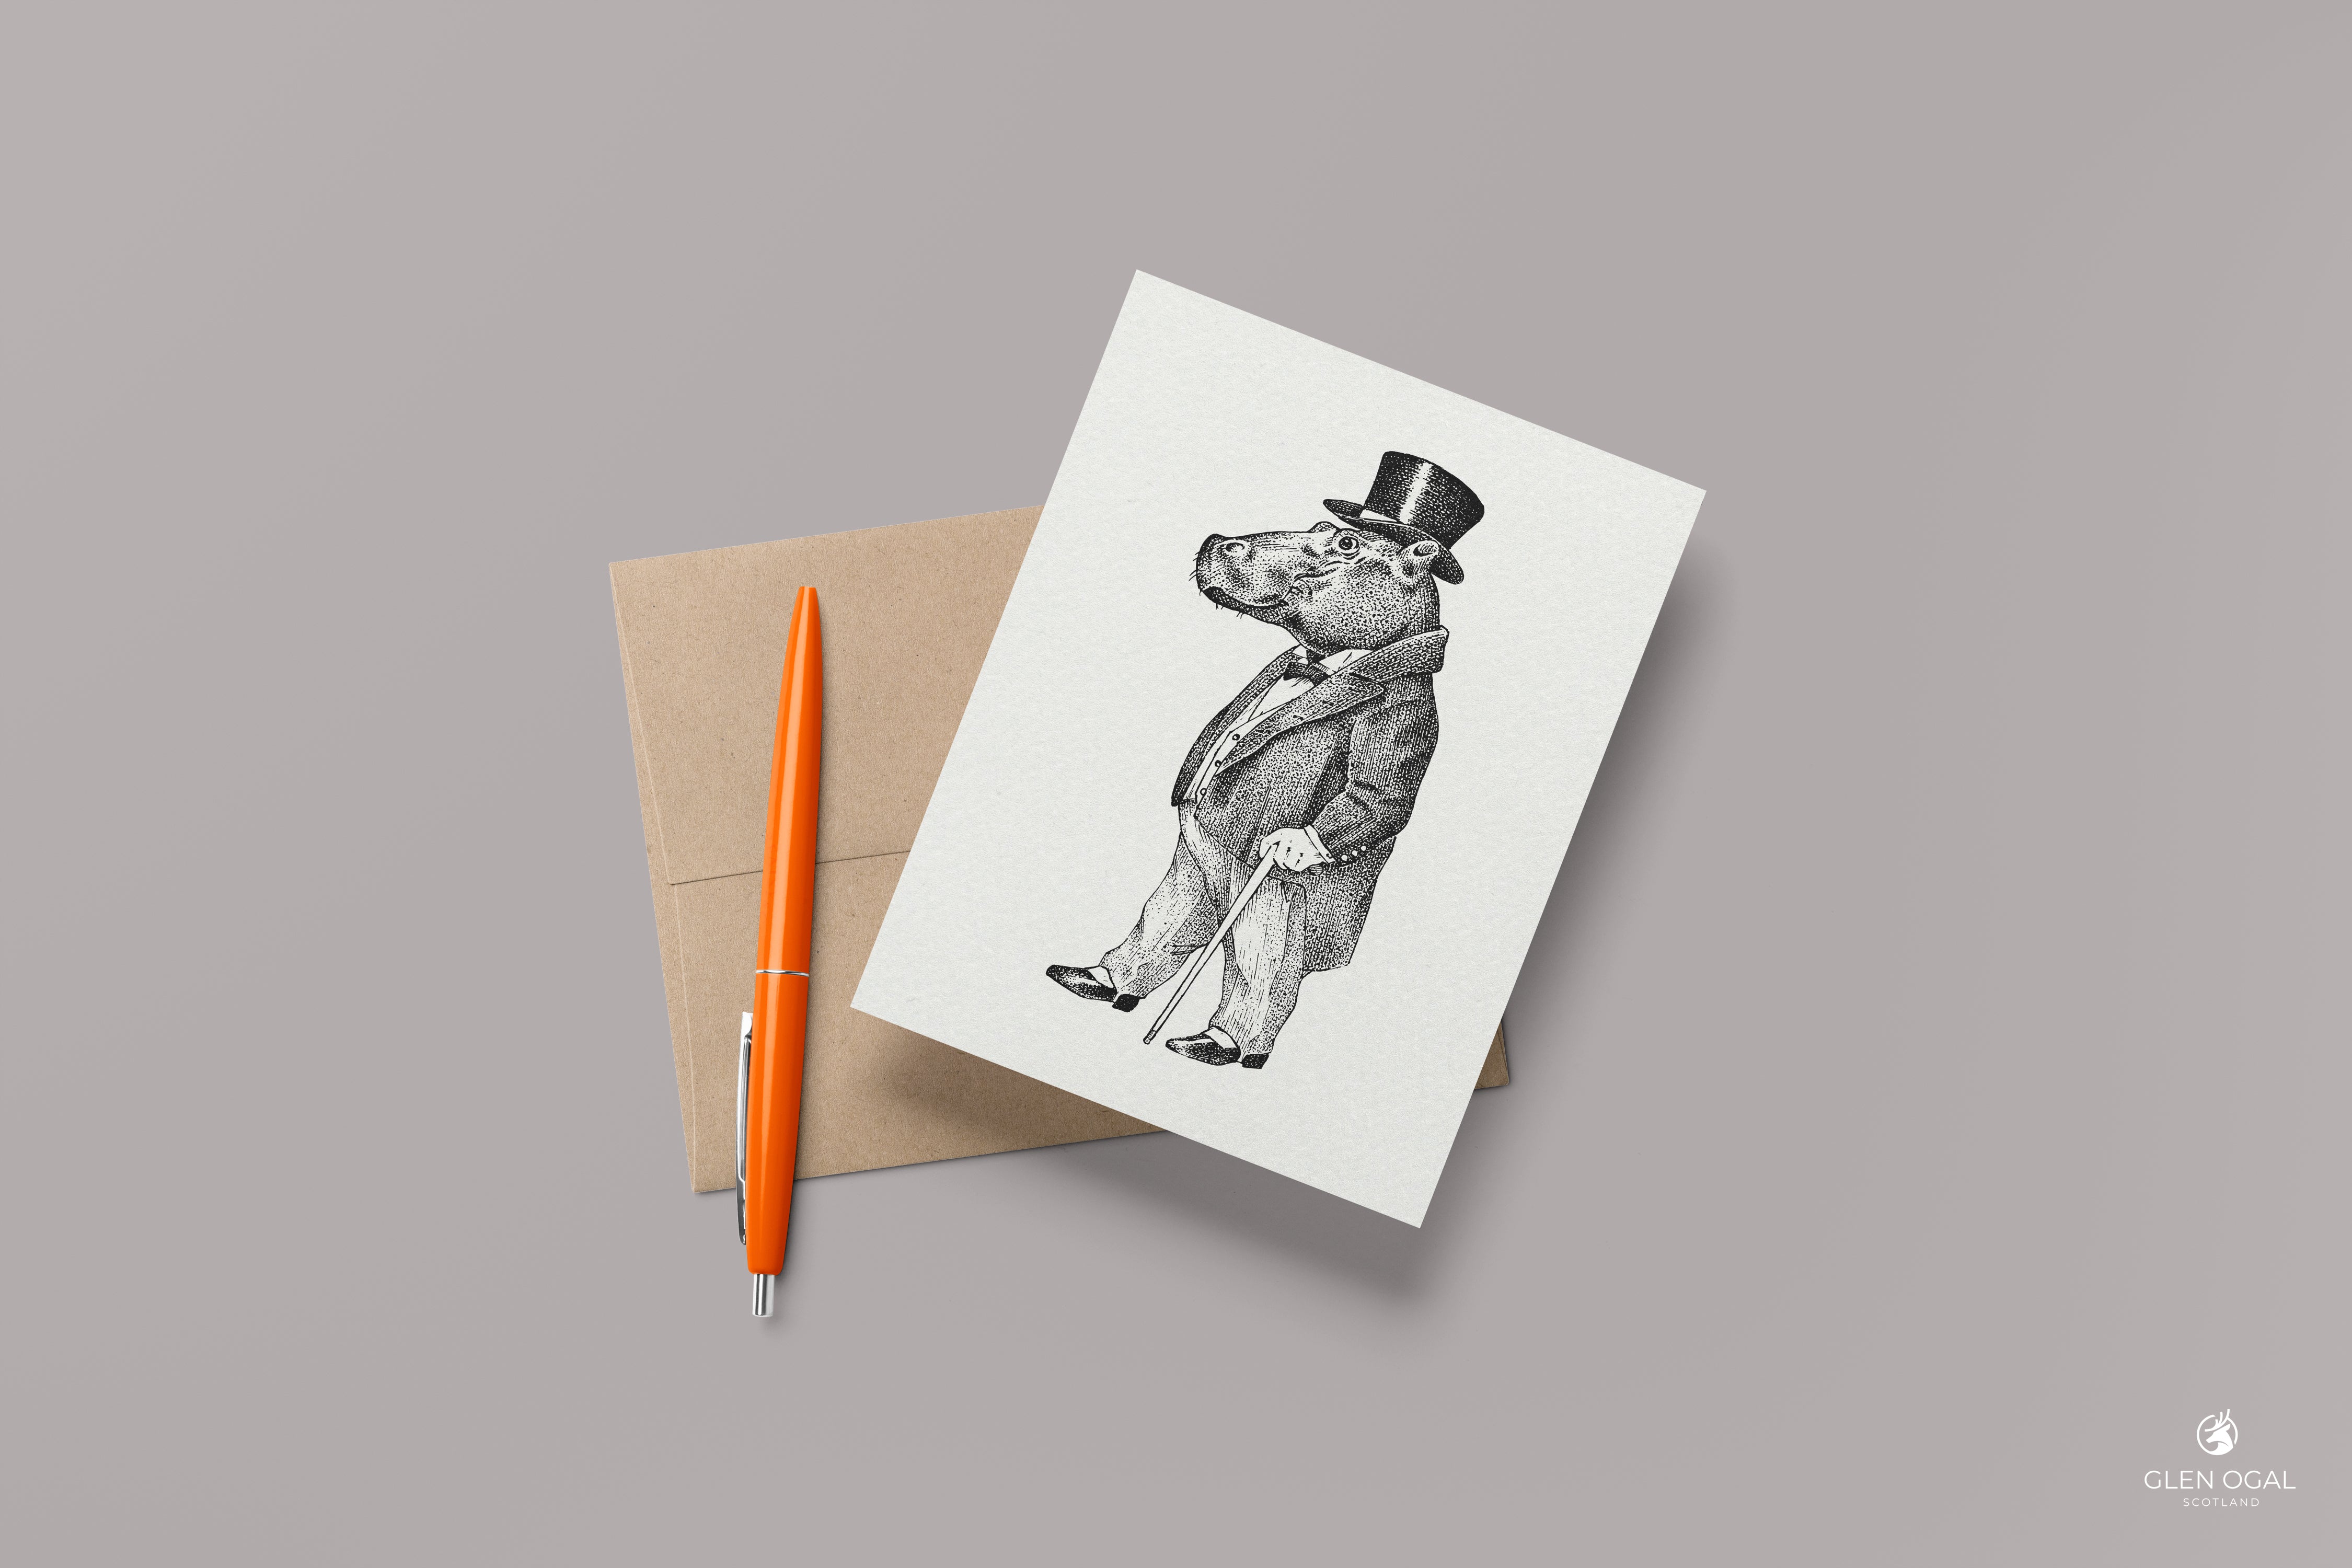 Pack of 5 Retro Gentleman Hippo Note Cards